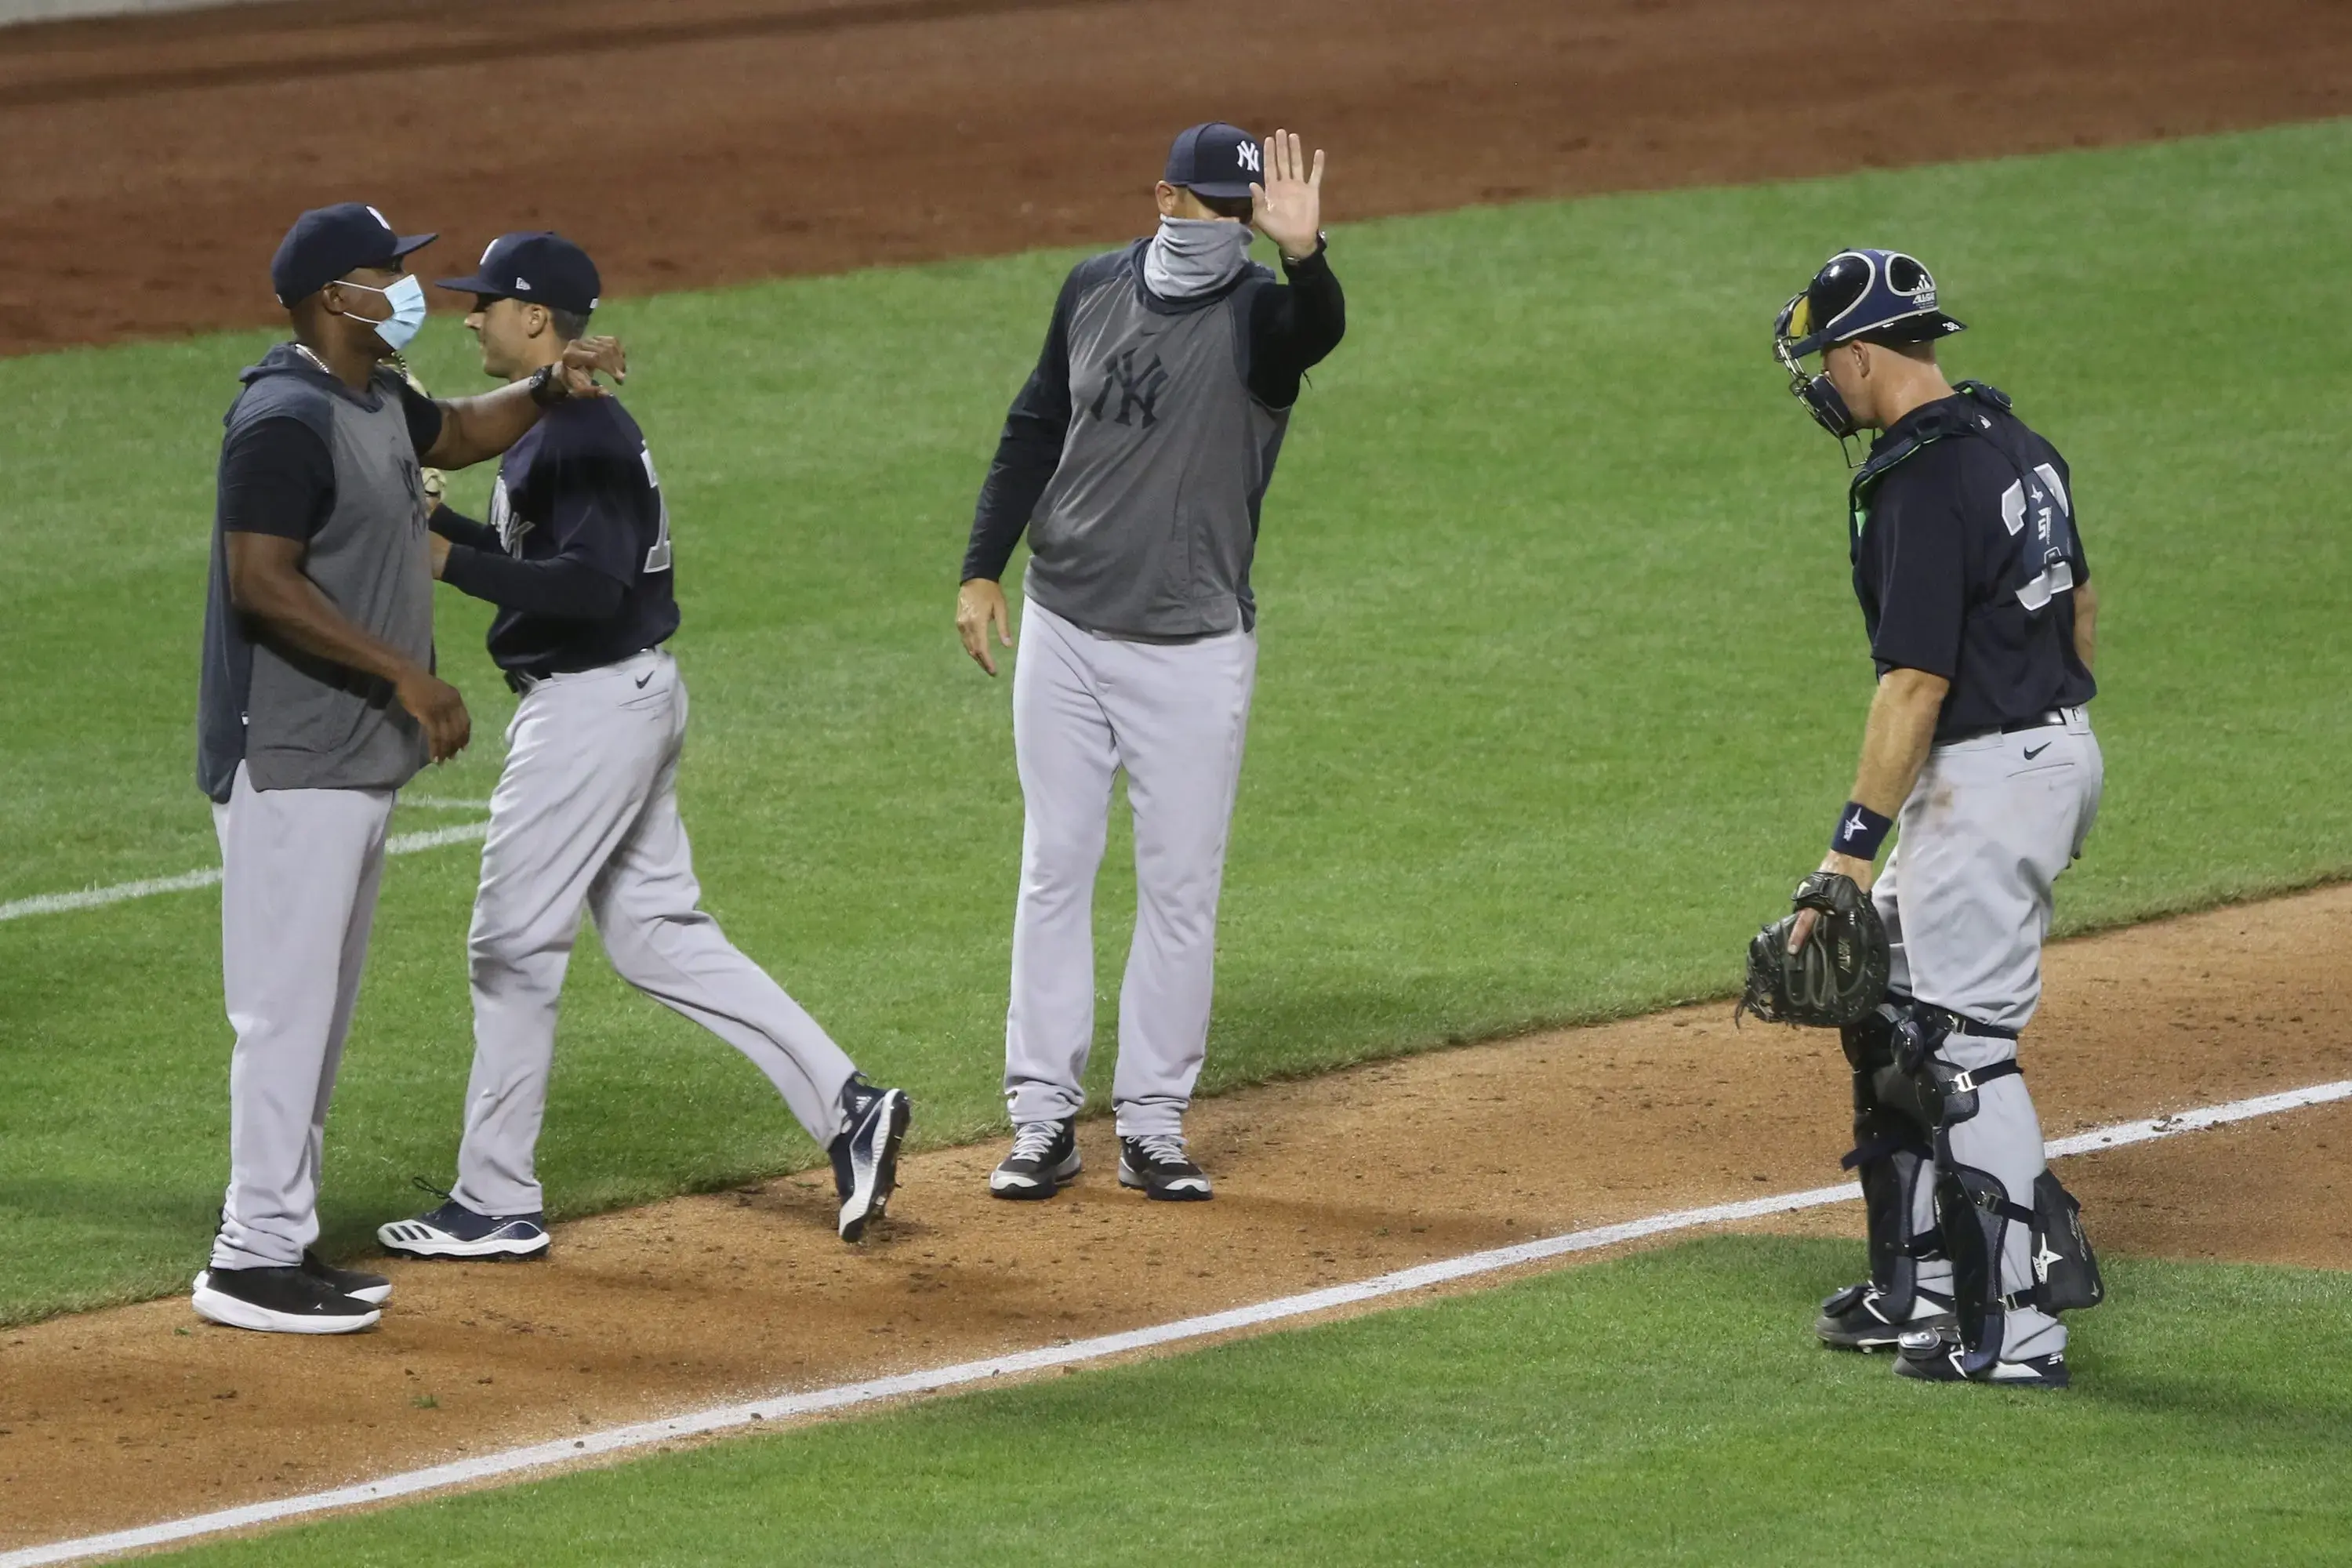 Yankee manager Aaron Boone congratulates his team aye the end of the game. The New York Yankees came to Citi Field on July 18, 2020 to play the New York Mets in an exhibition game, a prelude to the opening game of the shortened season. The New York Yankees Came To Citi Field On July 18 2020 To Play The New York Mets In An Exhibition Game A Prelude To The Opening Game Of The Shortened Season / © Chris Pedota, NorthJersey.com via Imagn Content Services, LLC